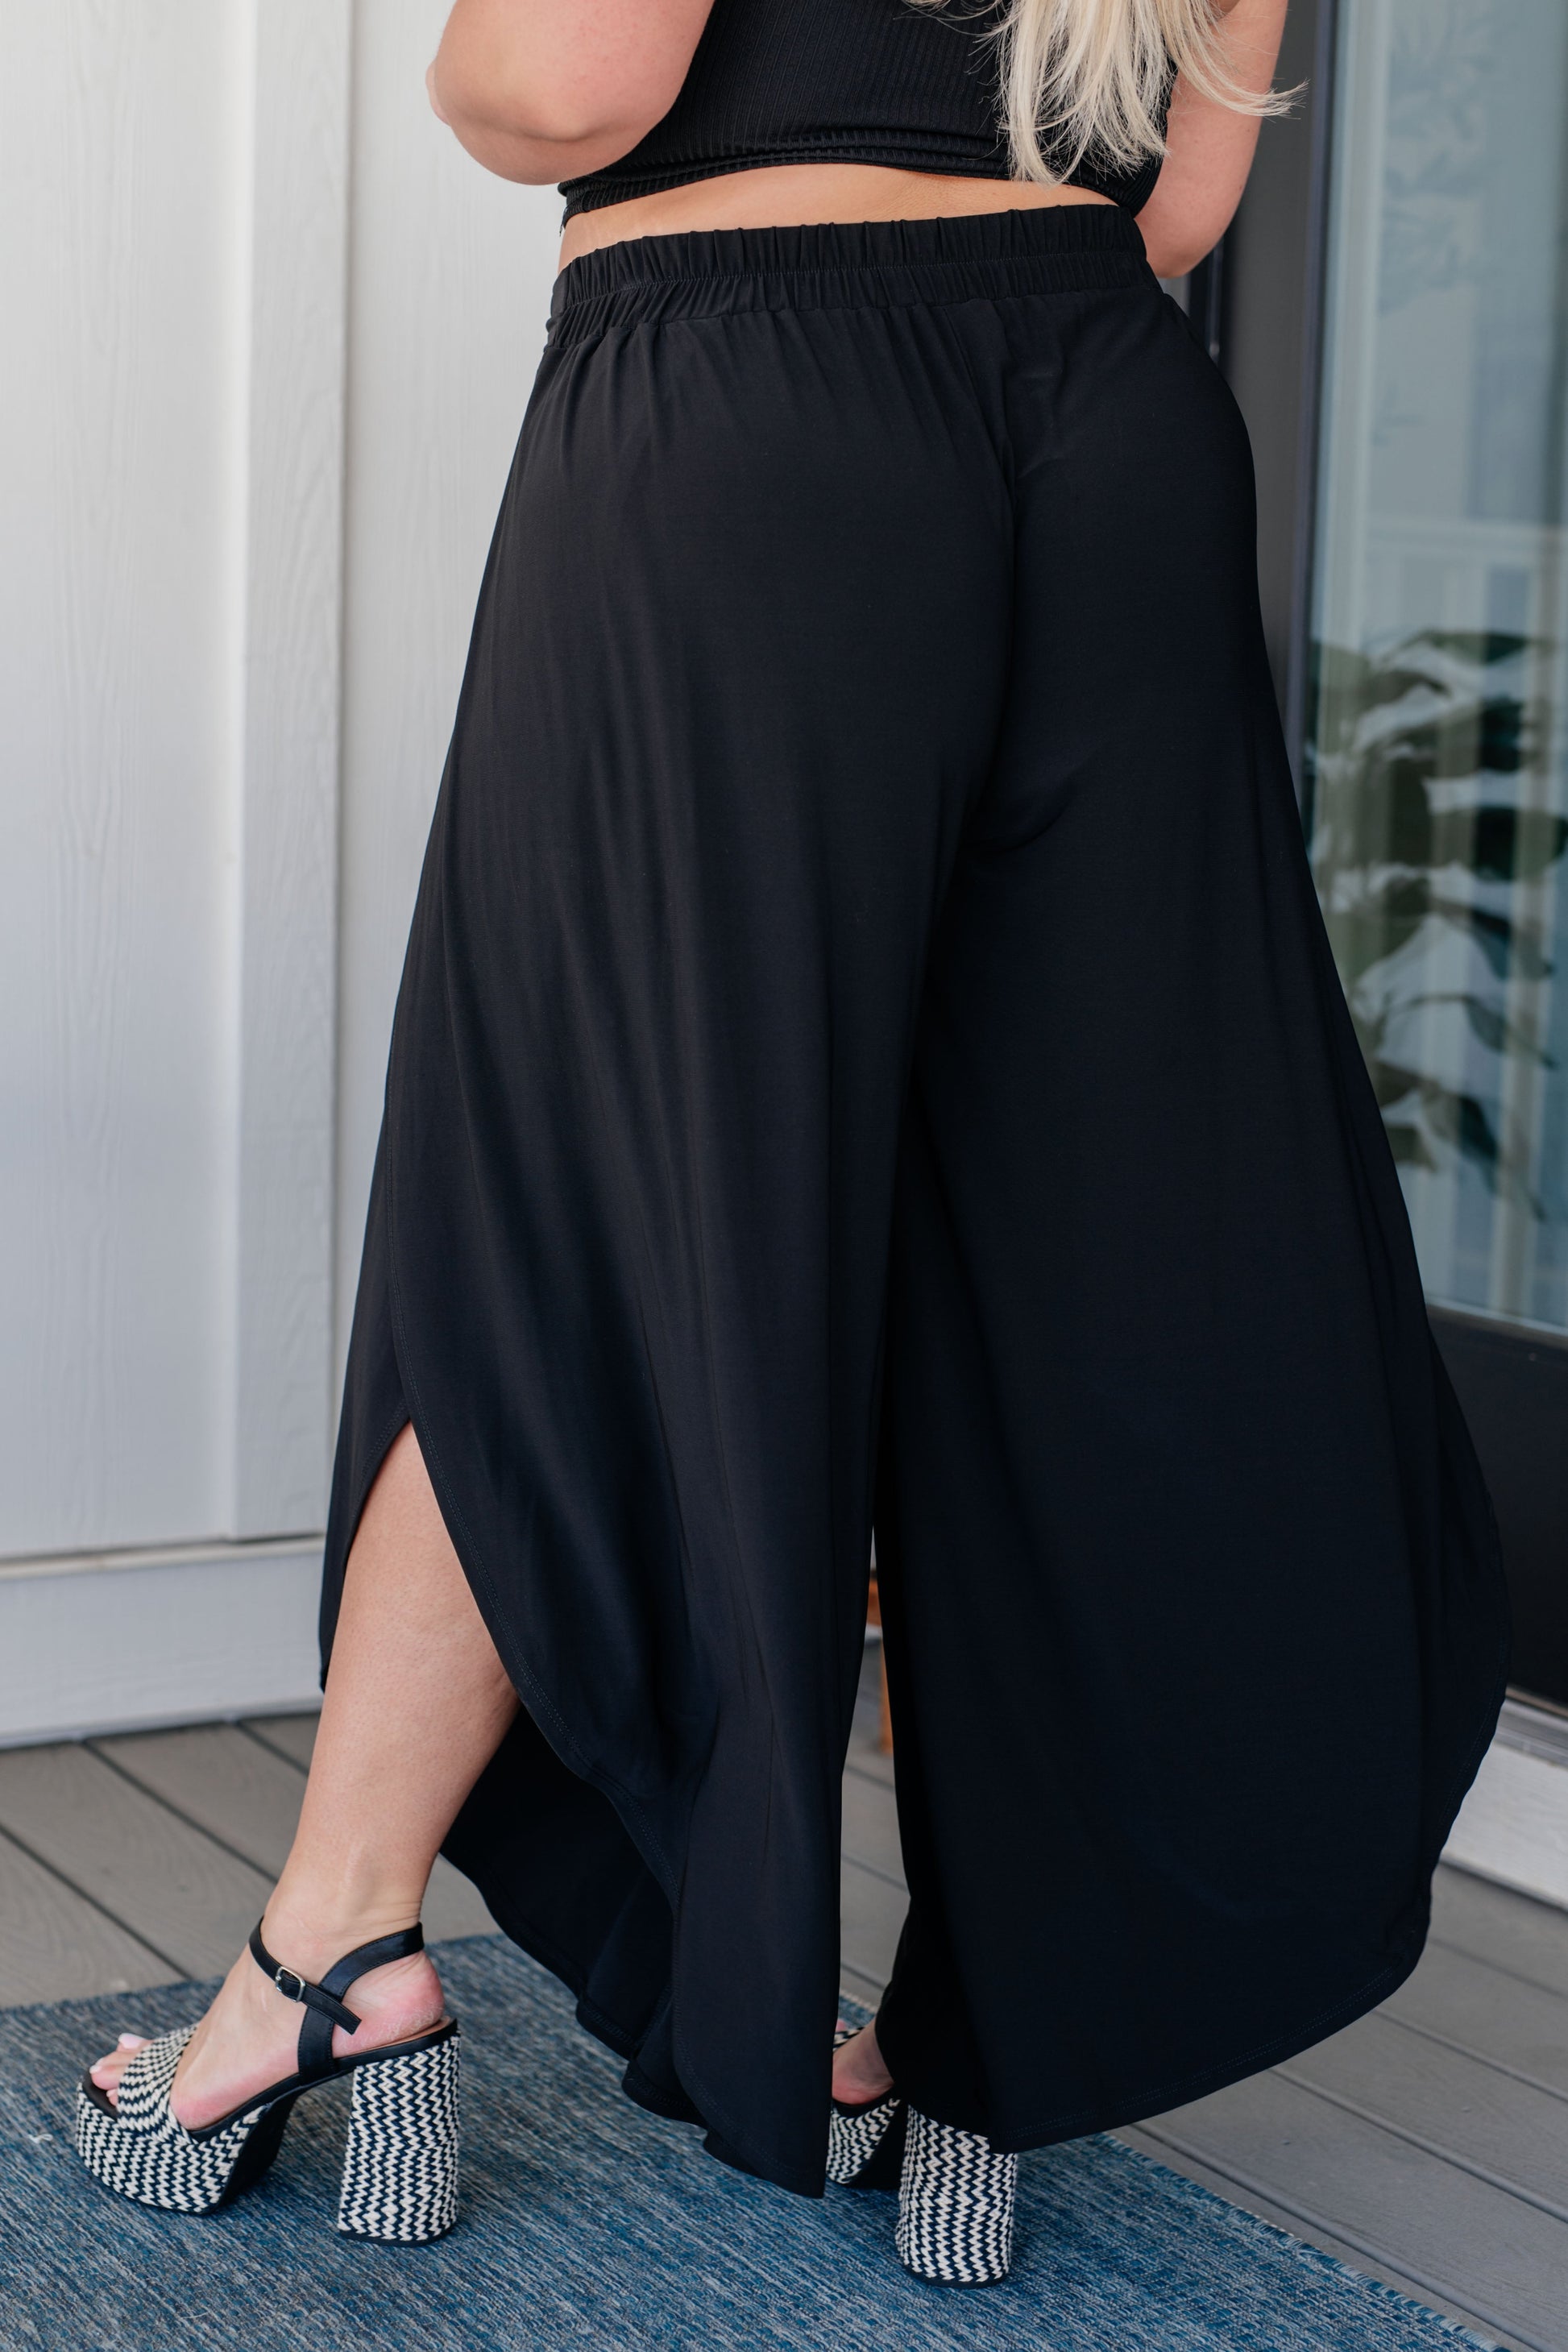 Holland Holiday Tulip Pants in Black - Southern Divas Boutique